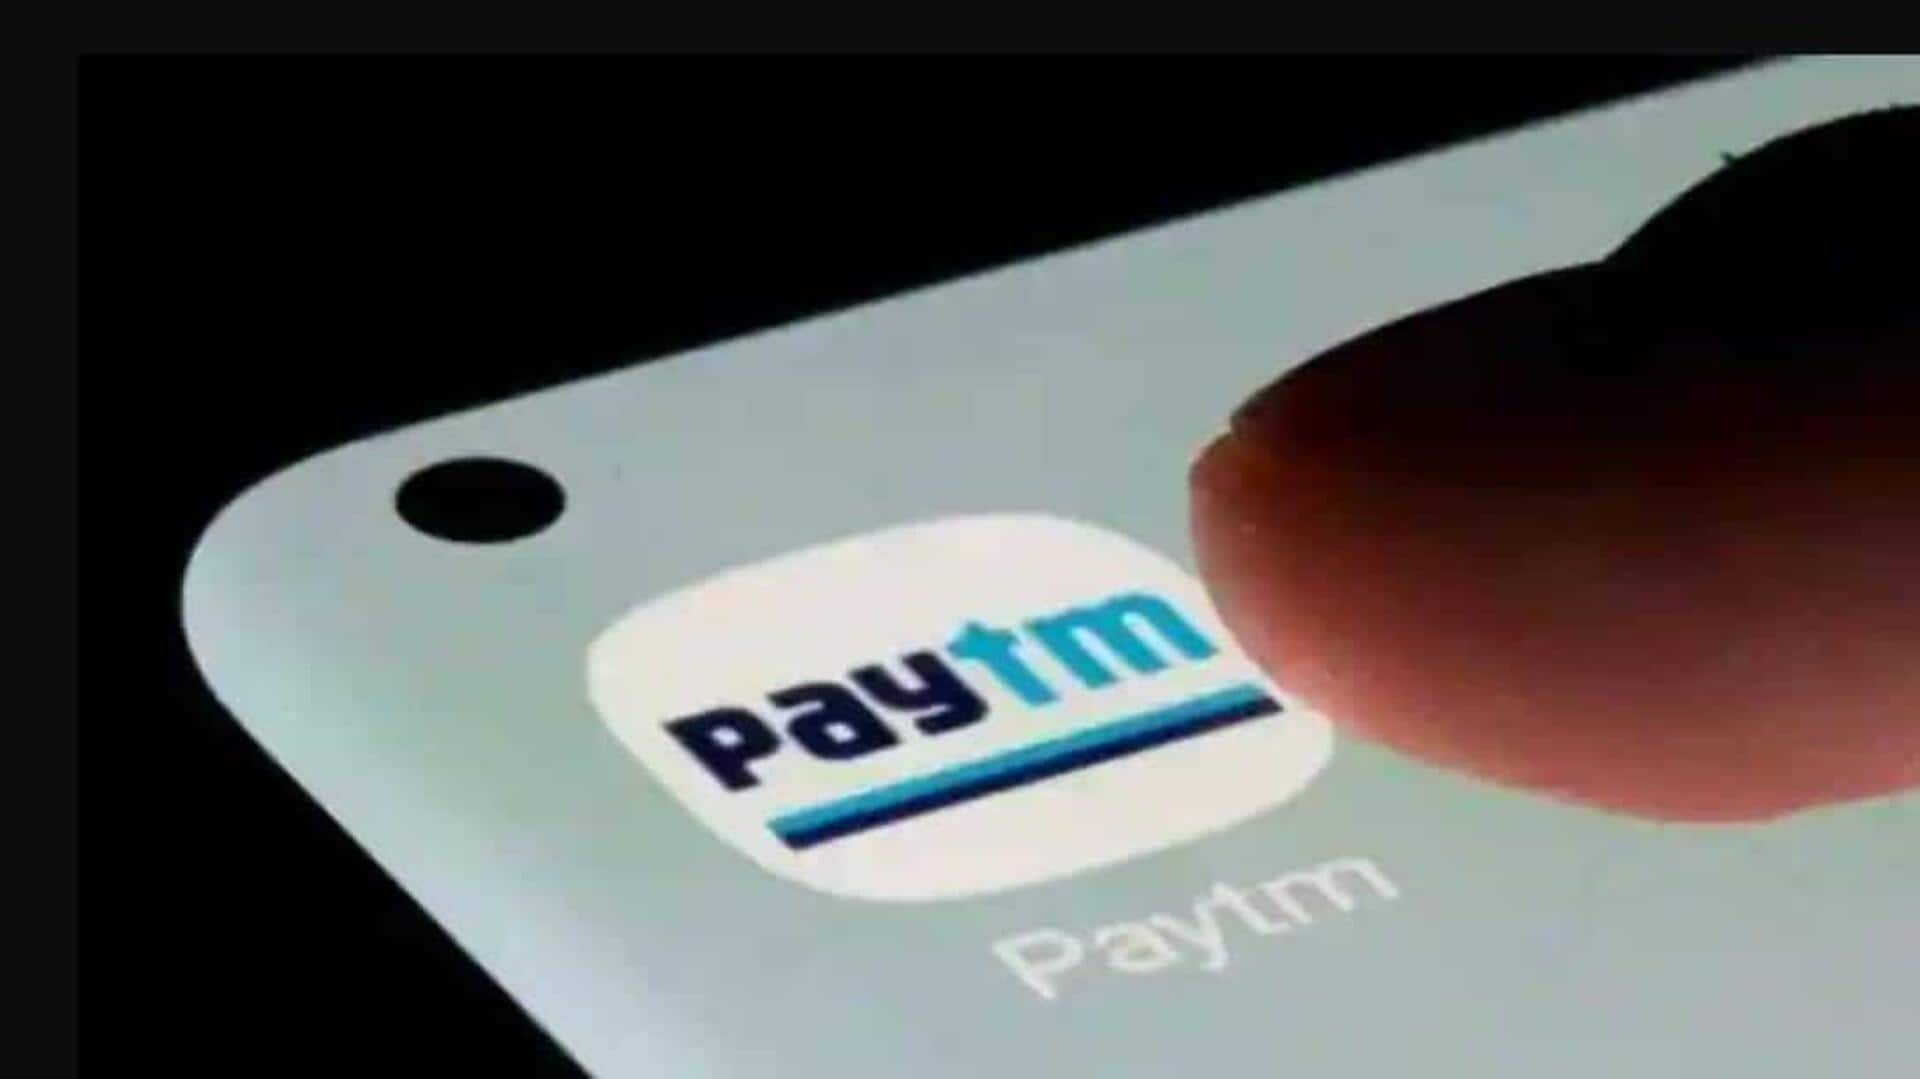 Paytm surpasses 10 crore monthly active users